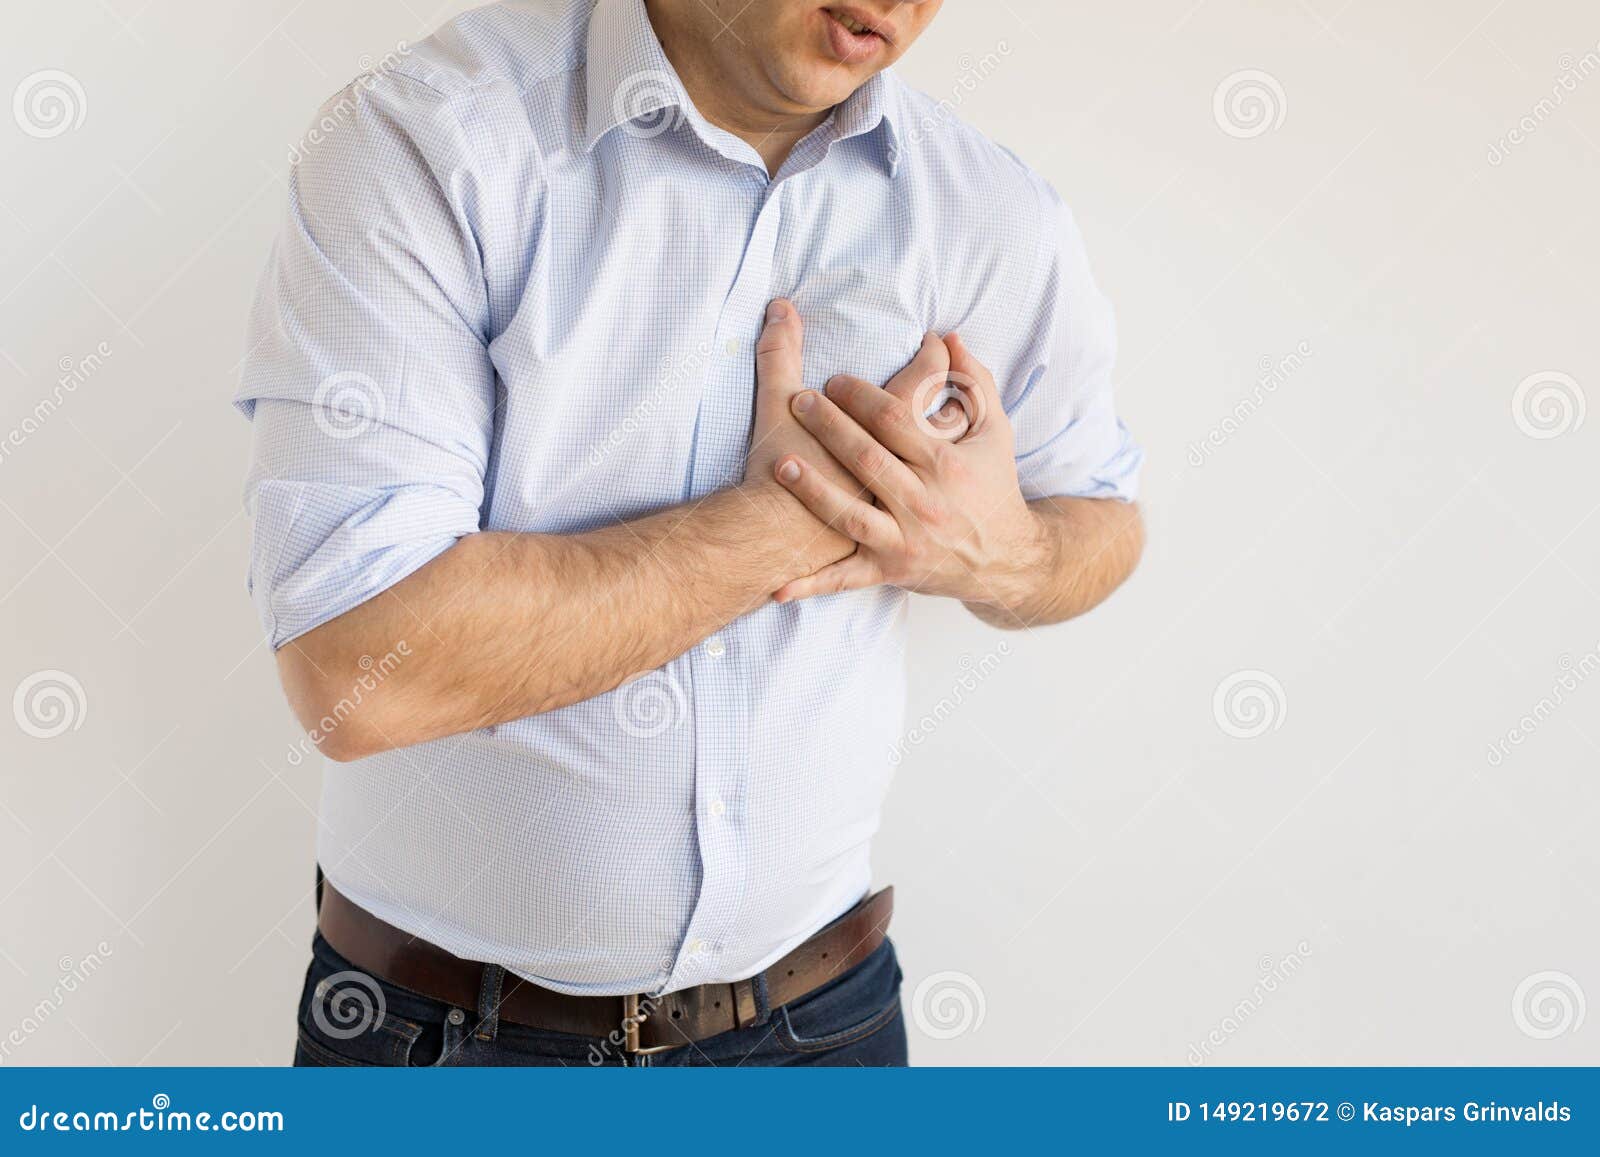 man holding his chest in pain. heart attack symptom